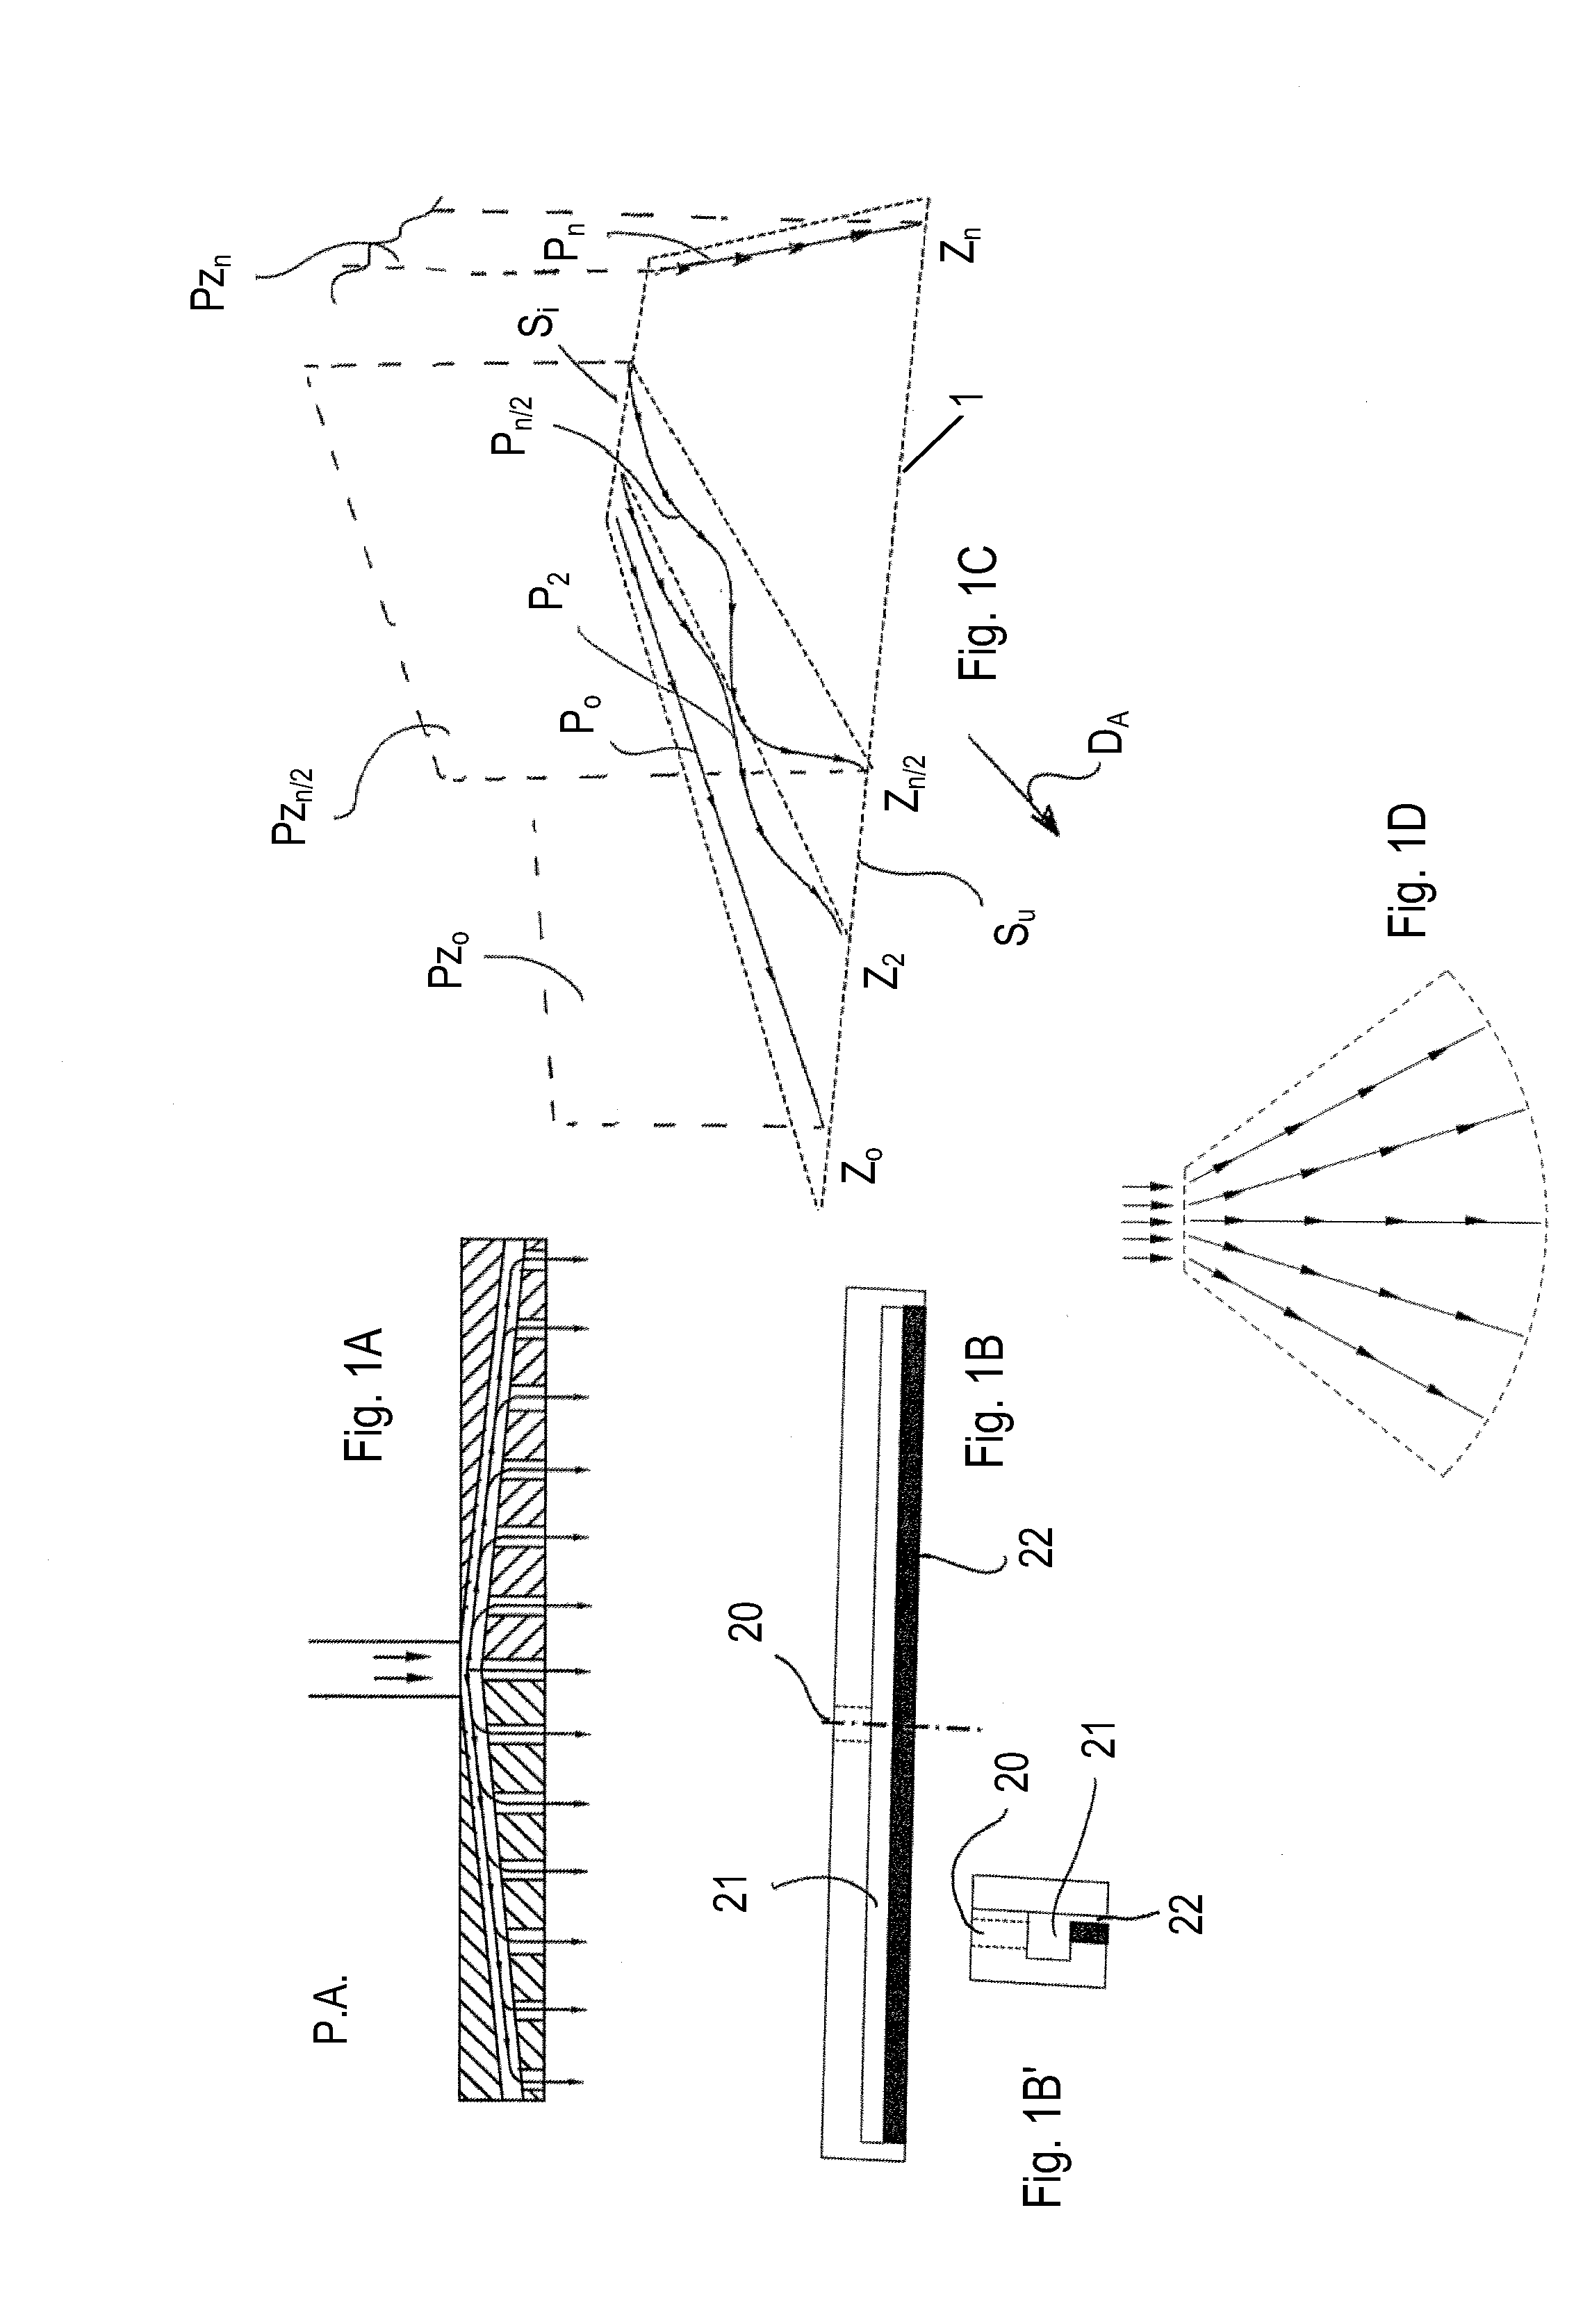 Method, device and apparatus for dispensing polyurethane mixtures